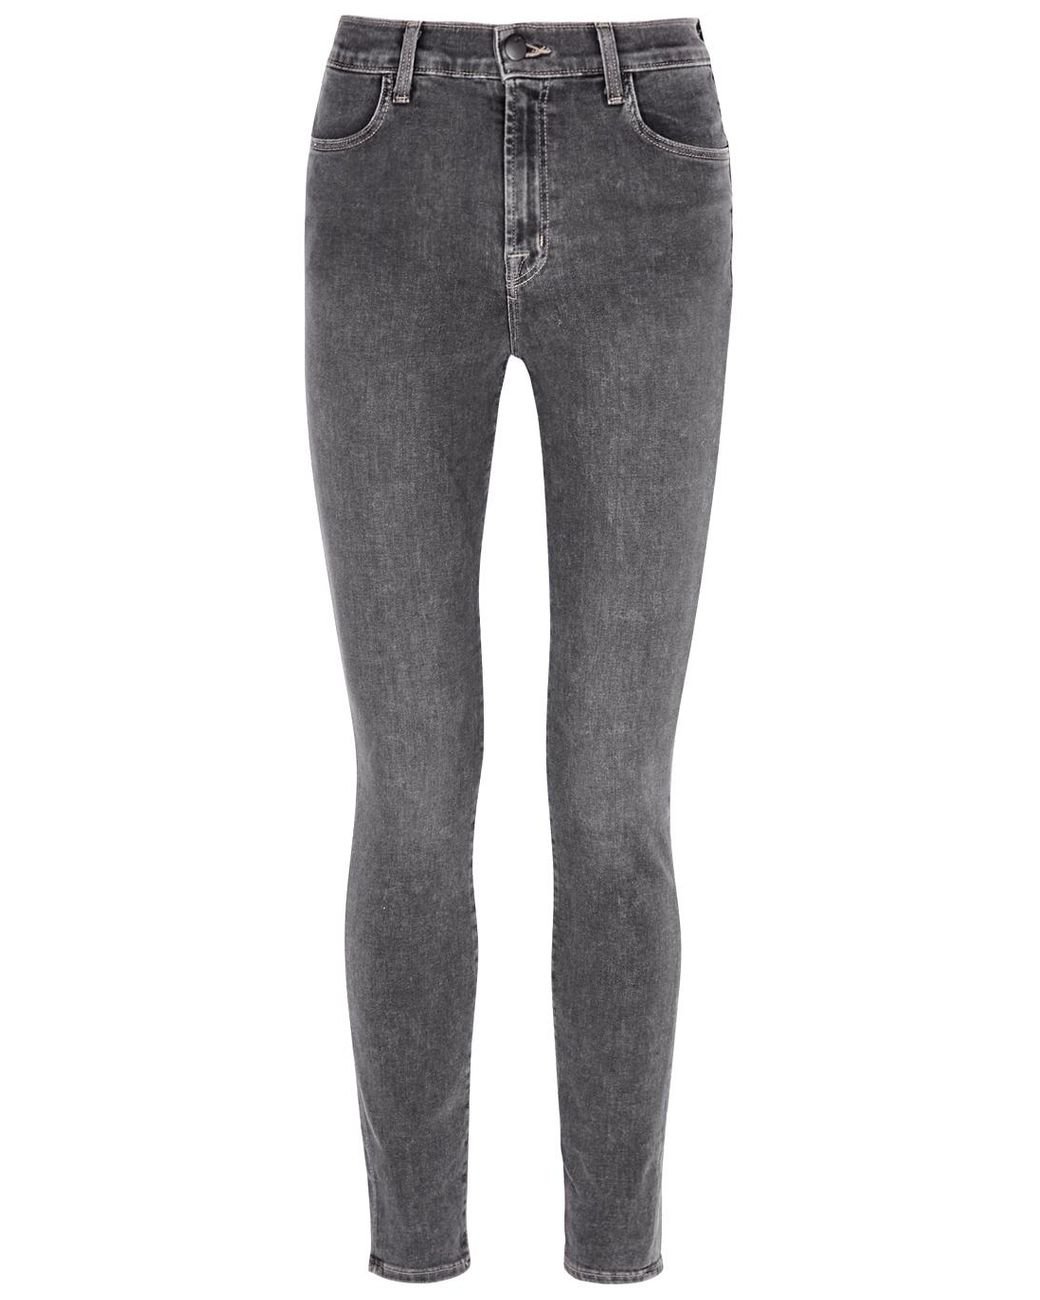 Svinde bort Inspicere Solrig J Brand Maria Grey High-rise Skinny Jeans in Gray | Lyst